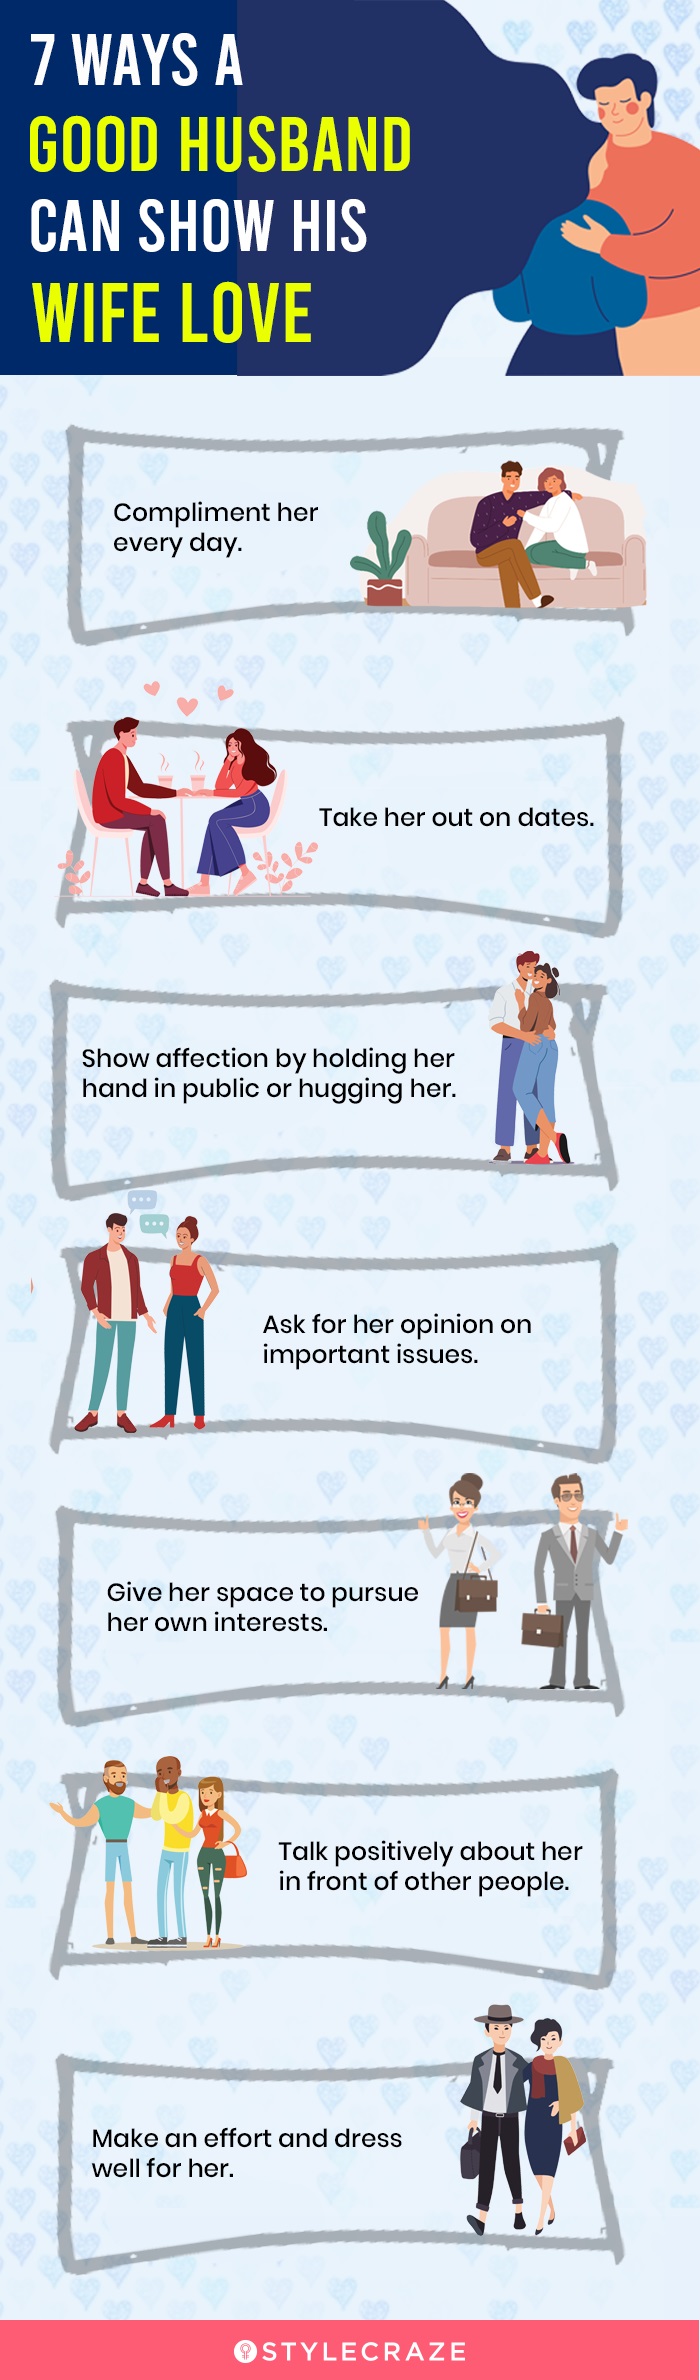 7 ways a good husband can show his wife love (infographic)